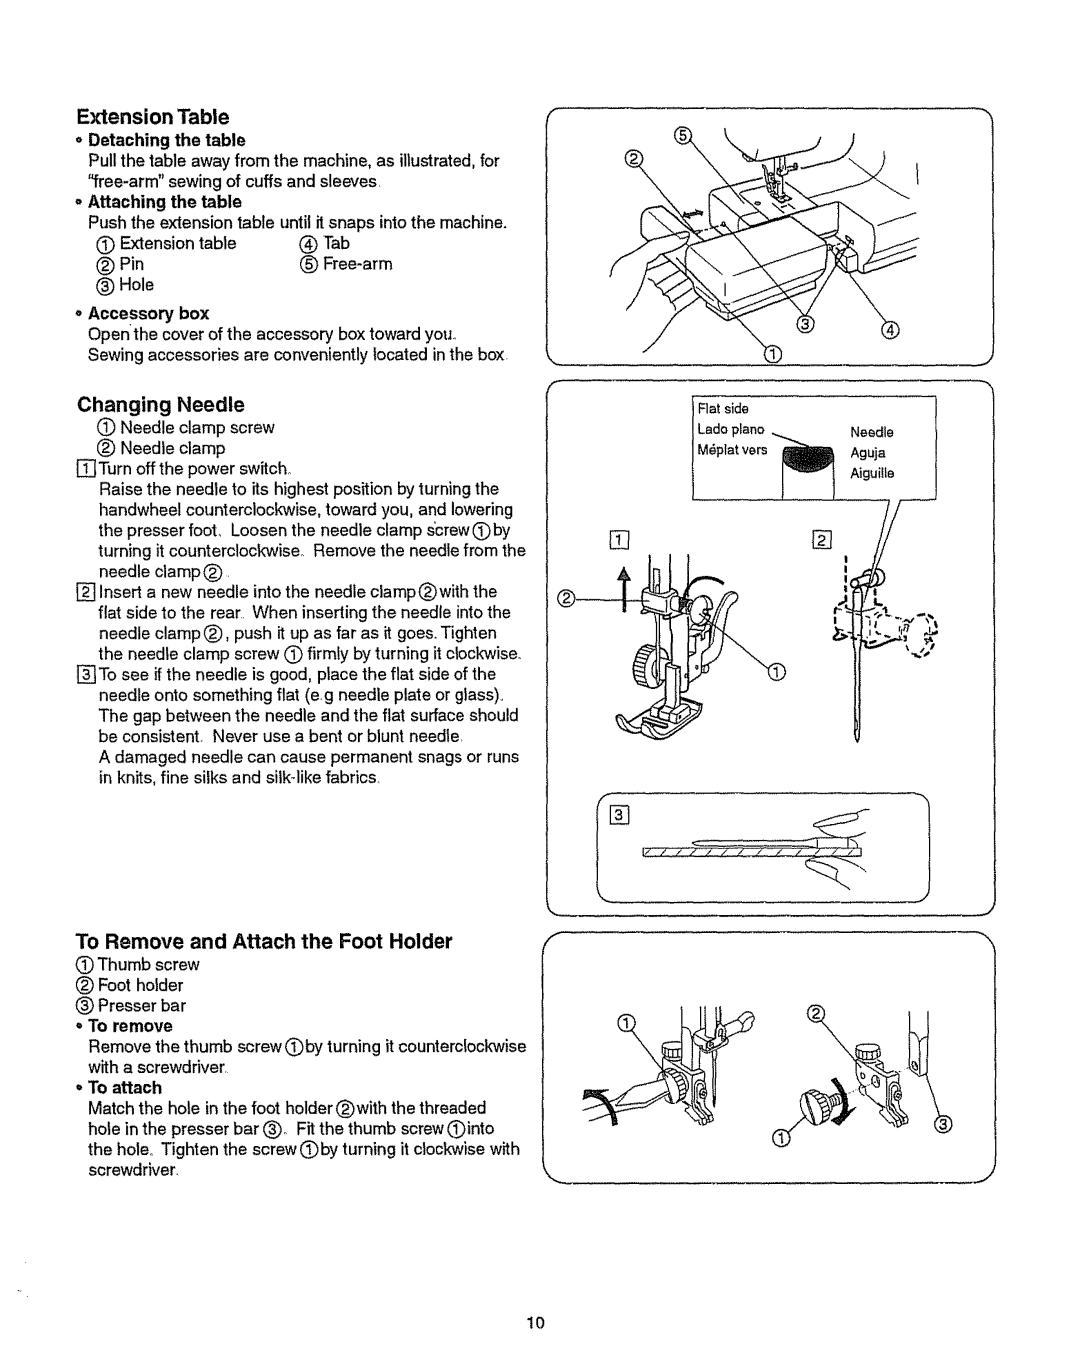 Kenmore 385.151082 owner manual To Remove and Attach the Foot Holder, Extension Table 